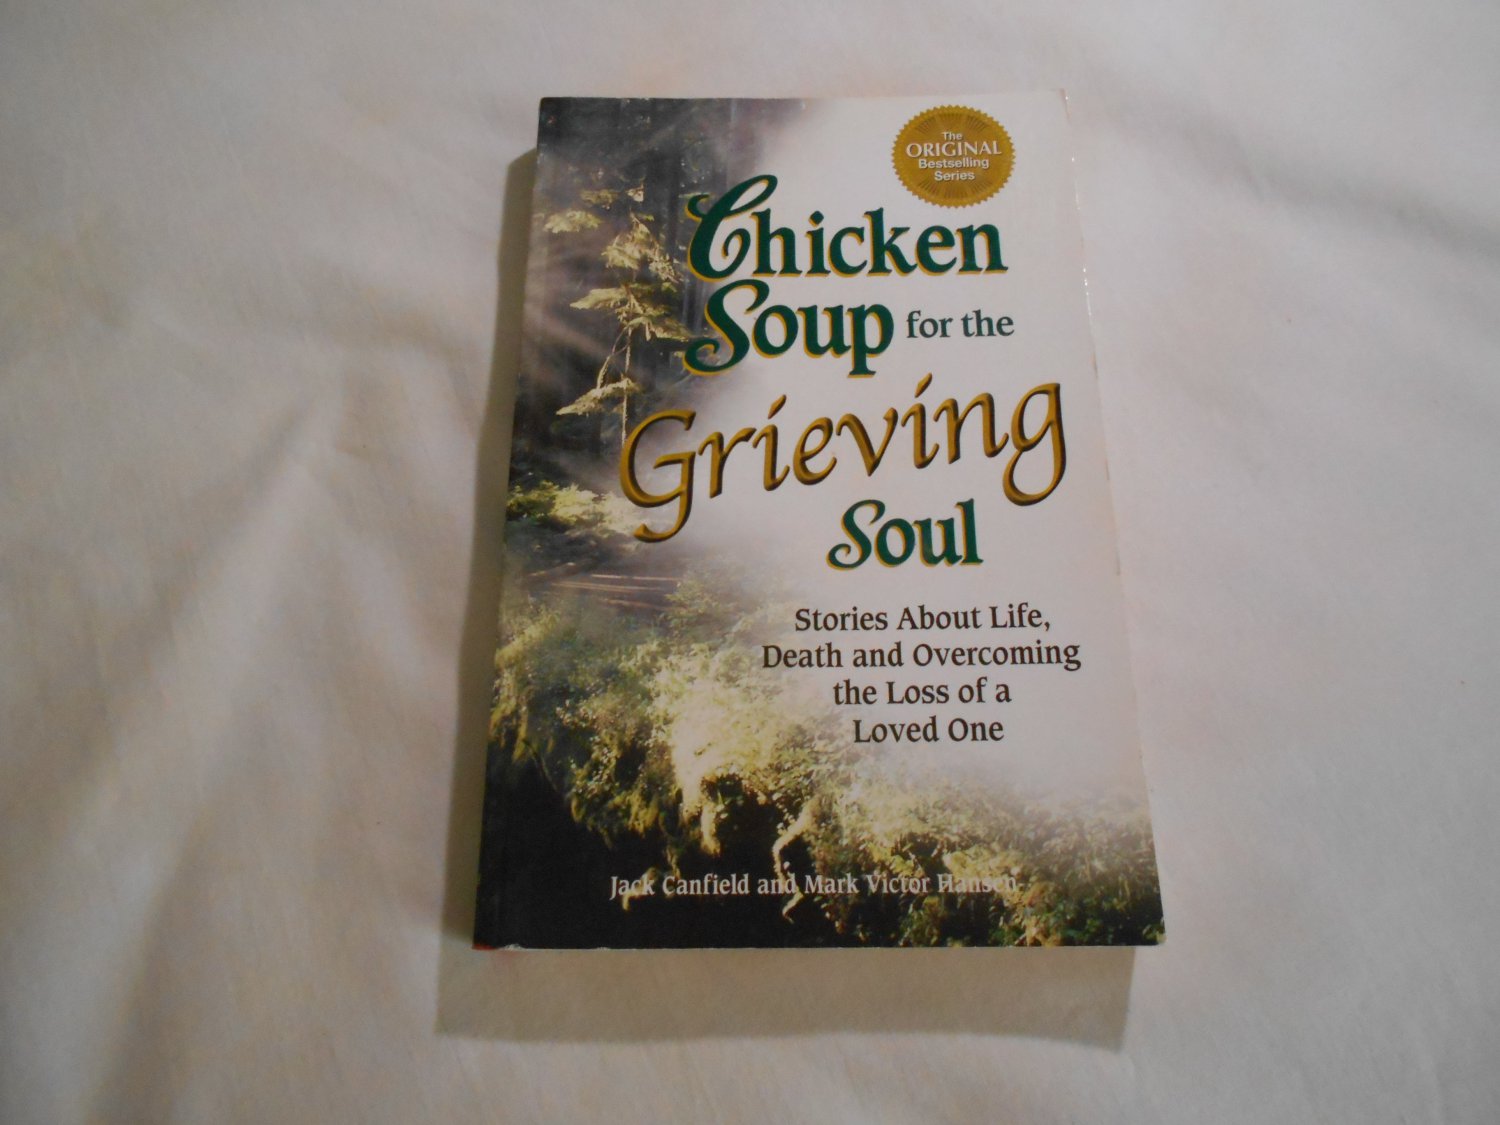 Chicken Soup for the Grieving Soul by Jack Canfield, Mark Victor Hansen (2003) (83) Inspirational